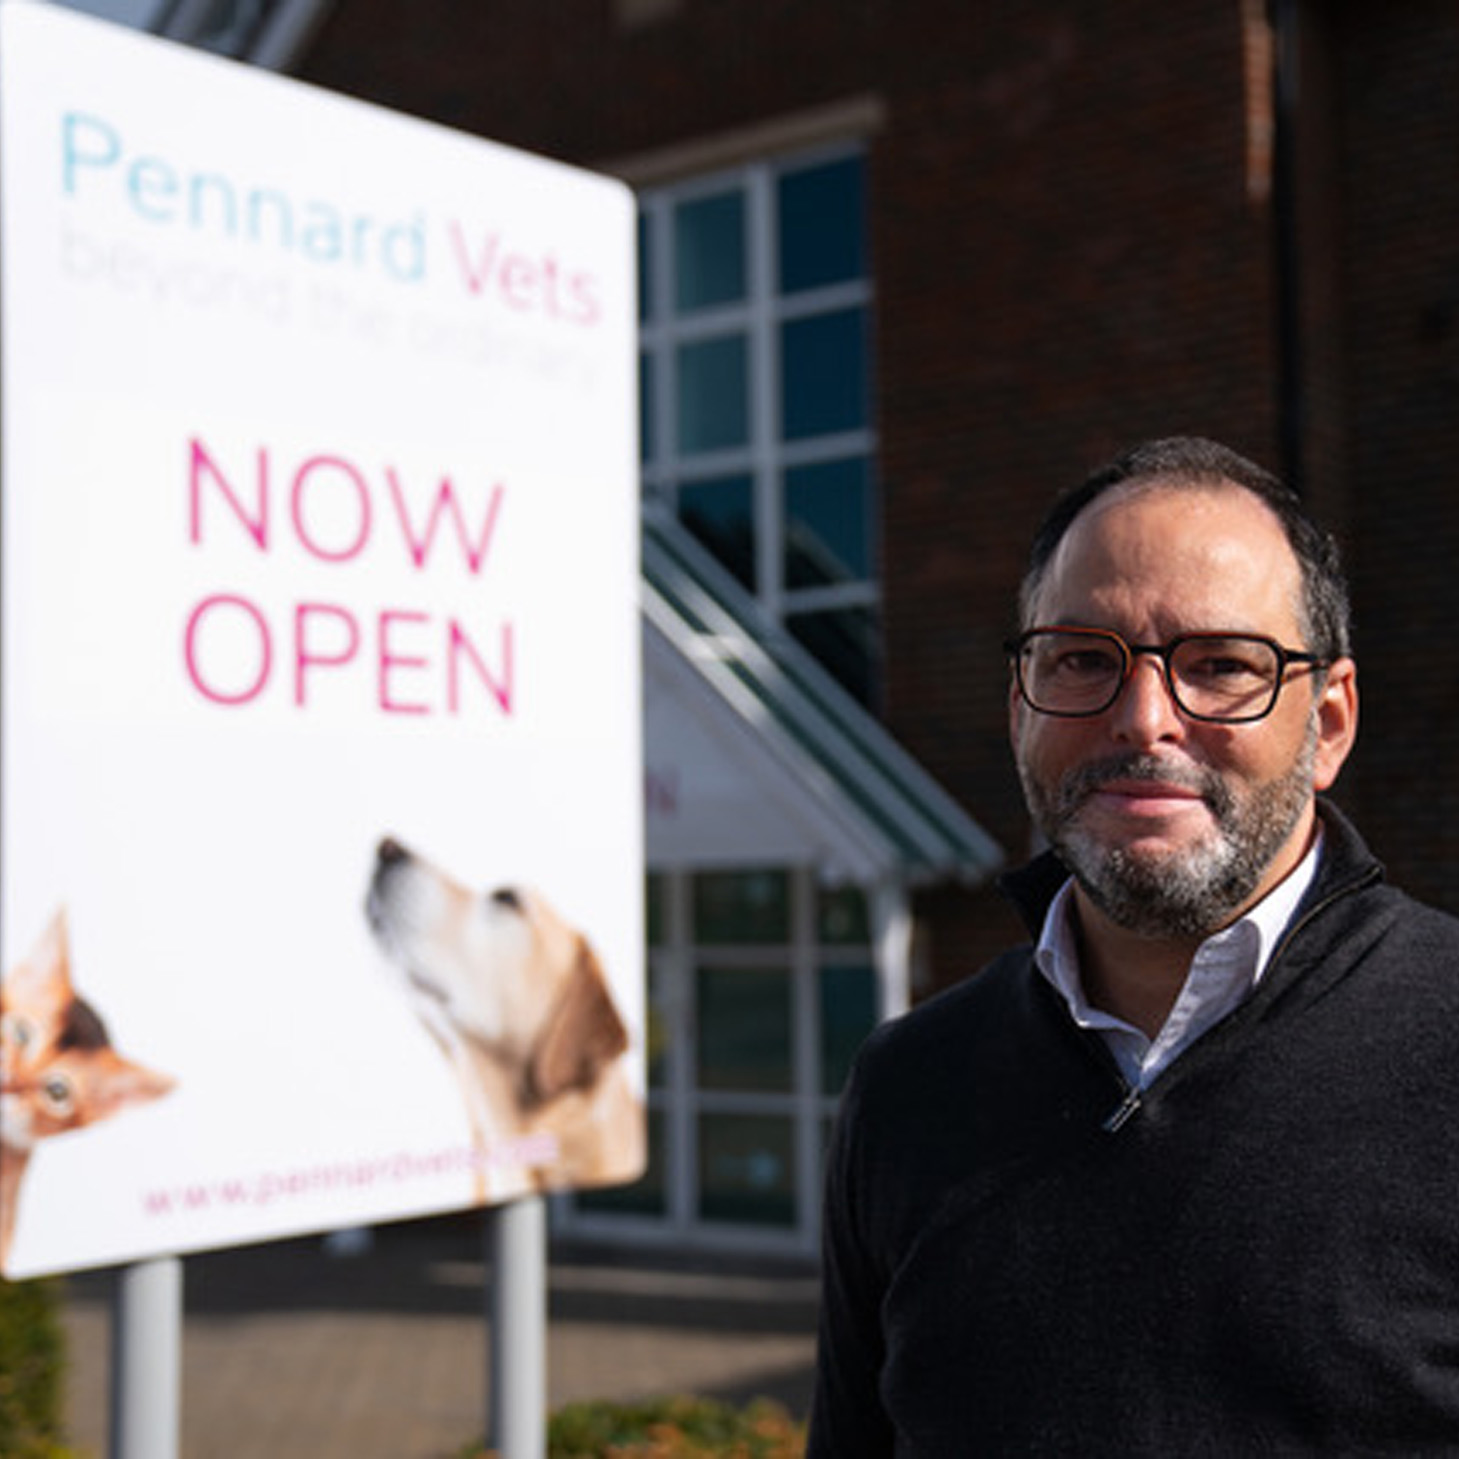 Pennard Vets opens one of the largest practices in region